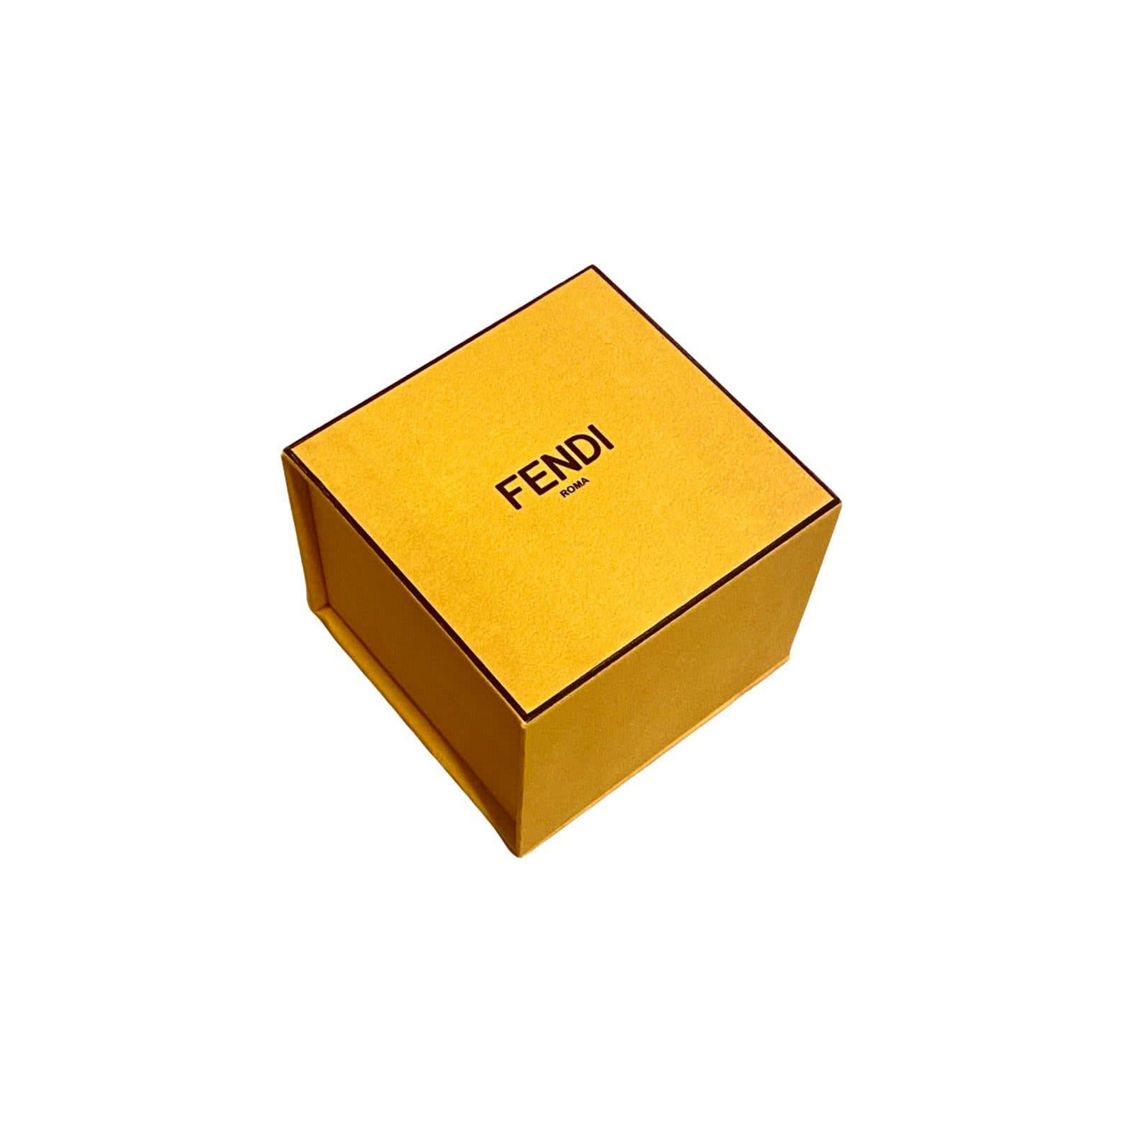 Fendi Fendigraphy Letters Gold Metal Ring Size Small (New) - Image 4 of 4